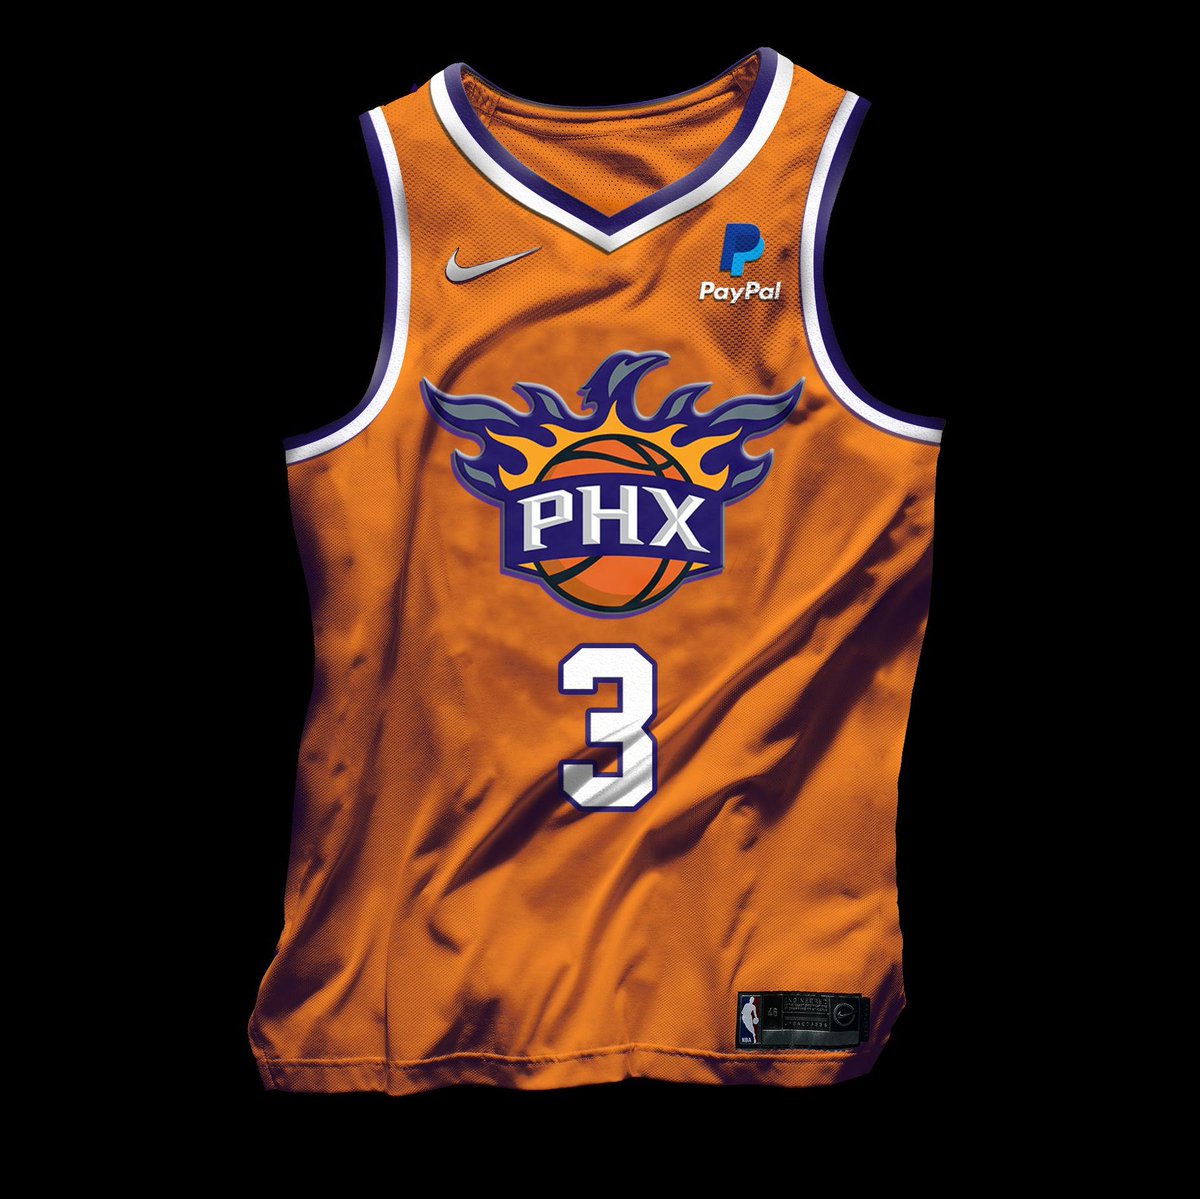 Thread: Since everyone is throwing out their  @Suns jersey ideas, let's take a look back at the early stuff I did that got me started. I think I've gotten a lot better since posting these, but still love some of these ideas and many of my followers have never seen these. Enjoy!